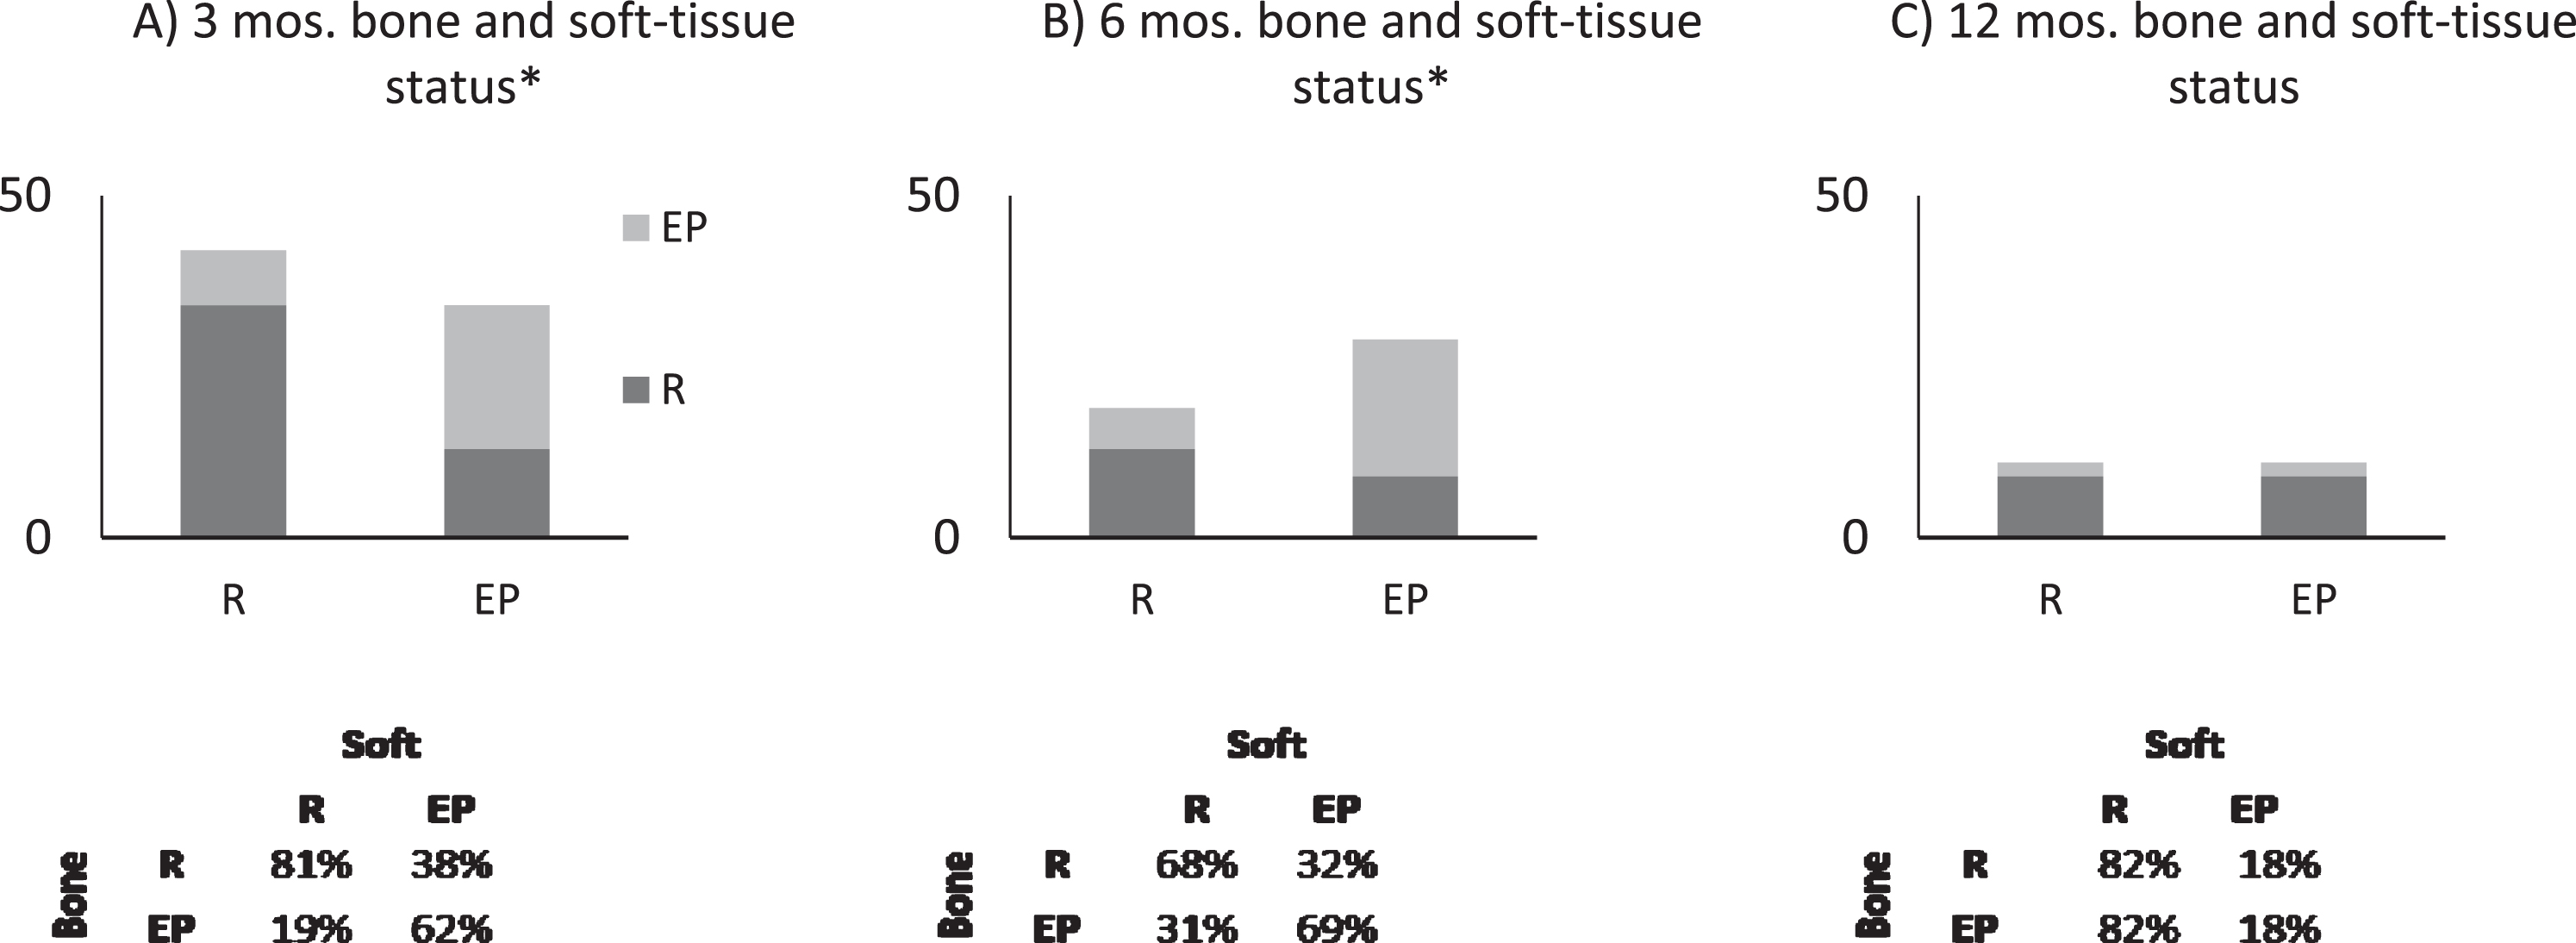 Generalized linear model indicates that soft-tissue response correlates with bone metastasis response at (A) 3 months and (B) 6 months (*p < 0.05) but not at (C) 12 months. Graphs show the proportion of response (R) and evidence of progression (EP) of disease in bone if a patient has R or EP in soft-tissue (x-axis).